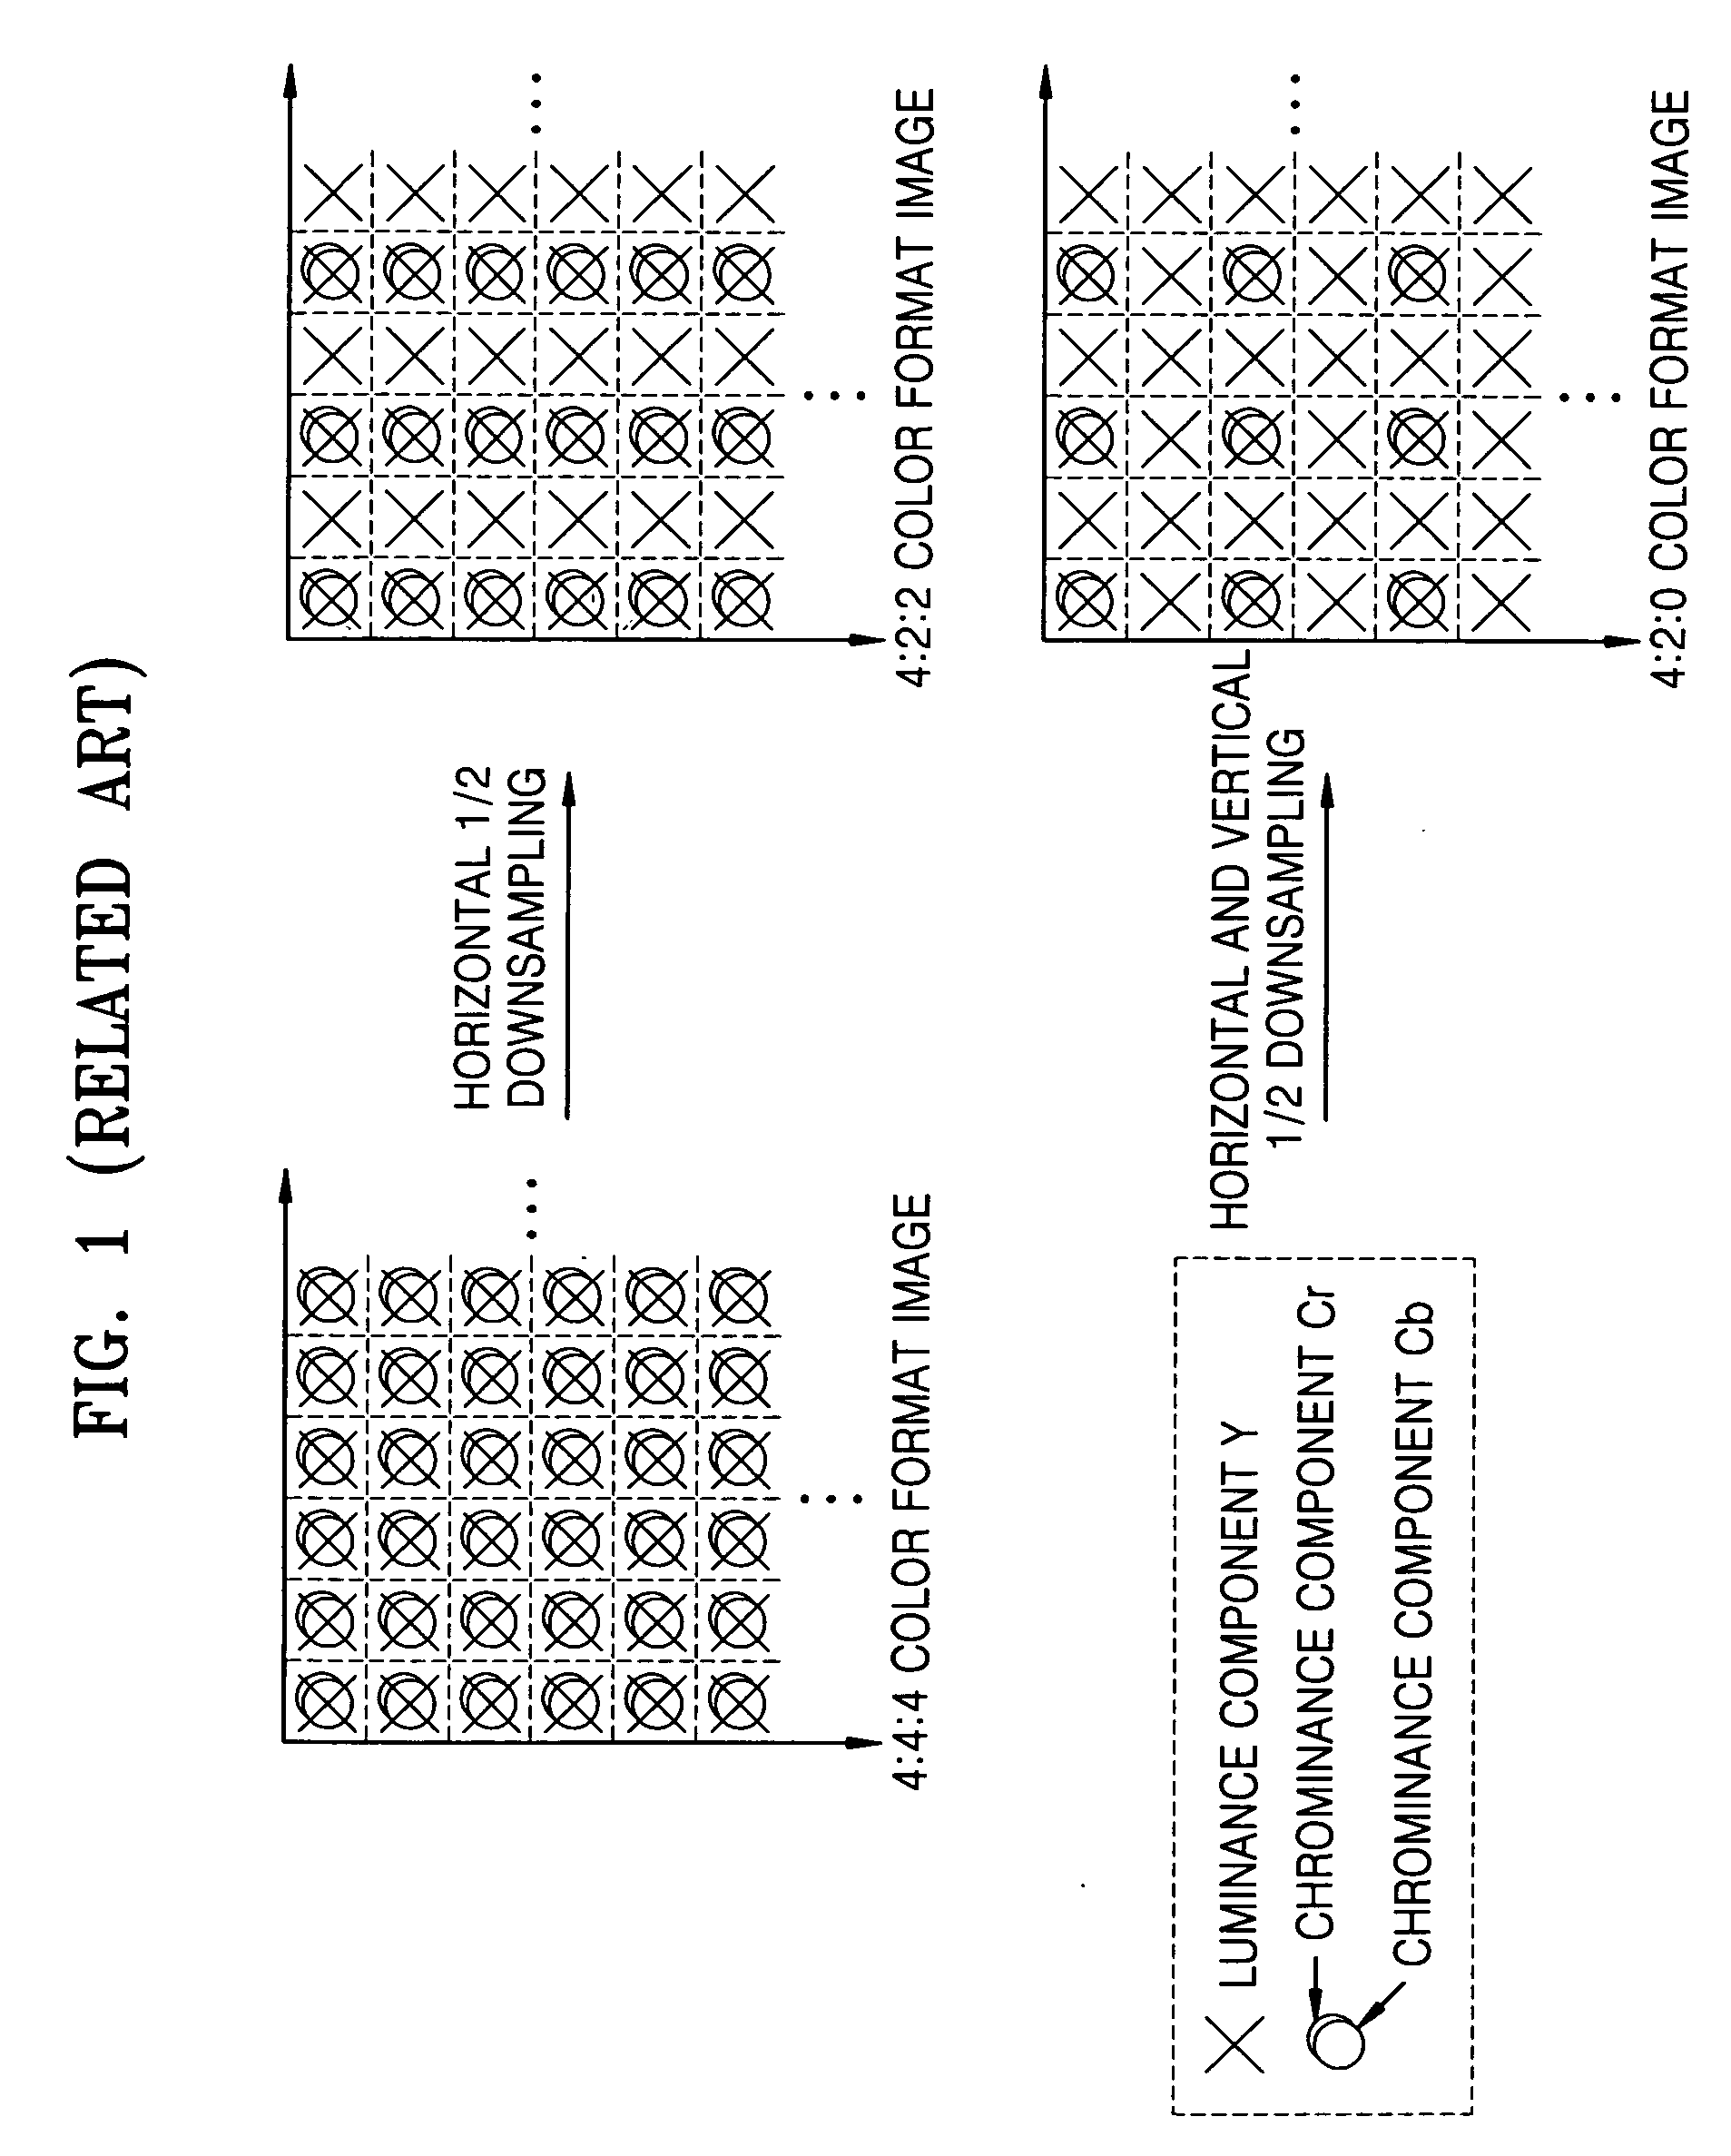 Method and apparatus for scalably encoding and decoding color video